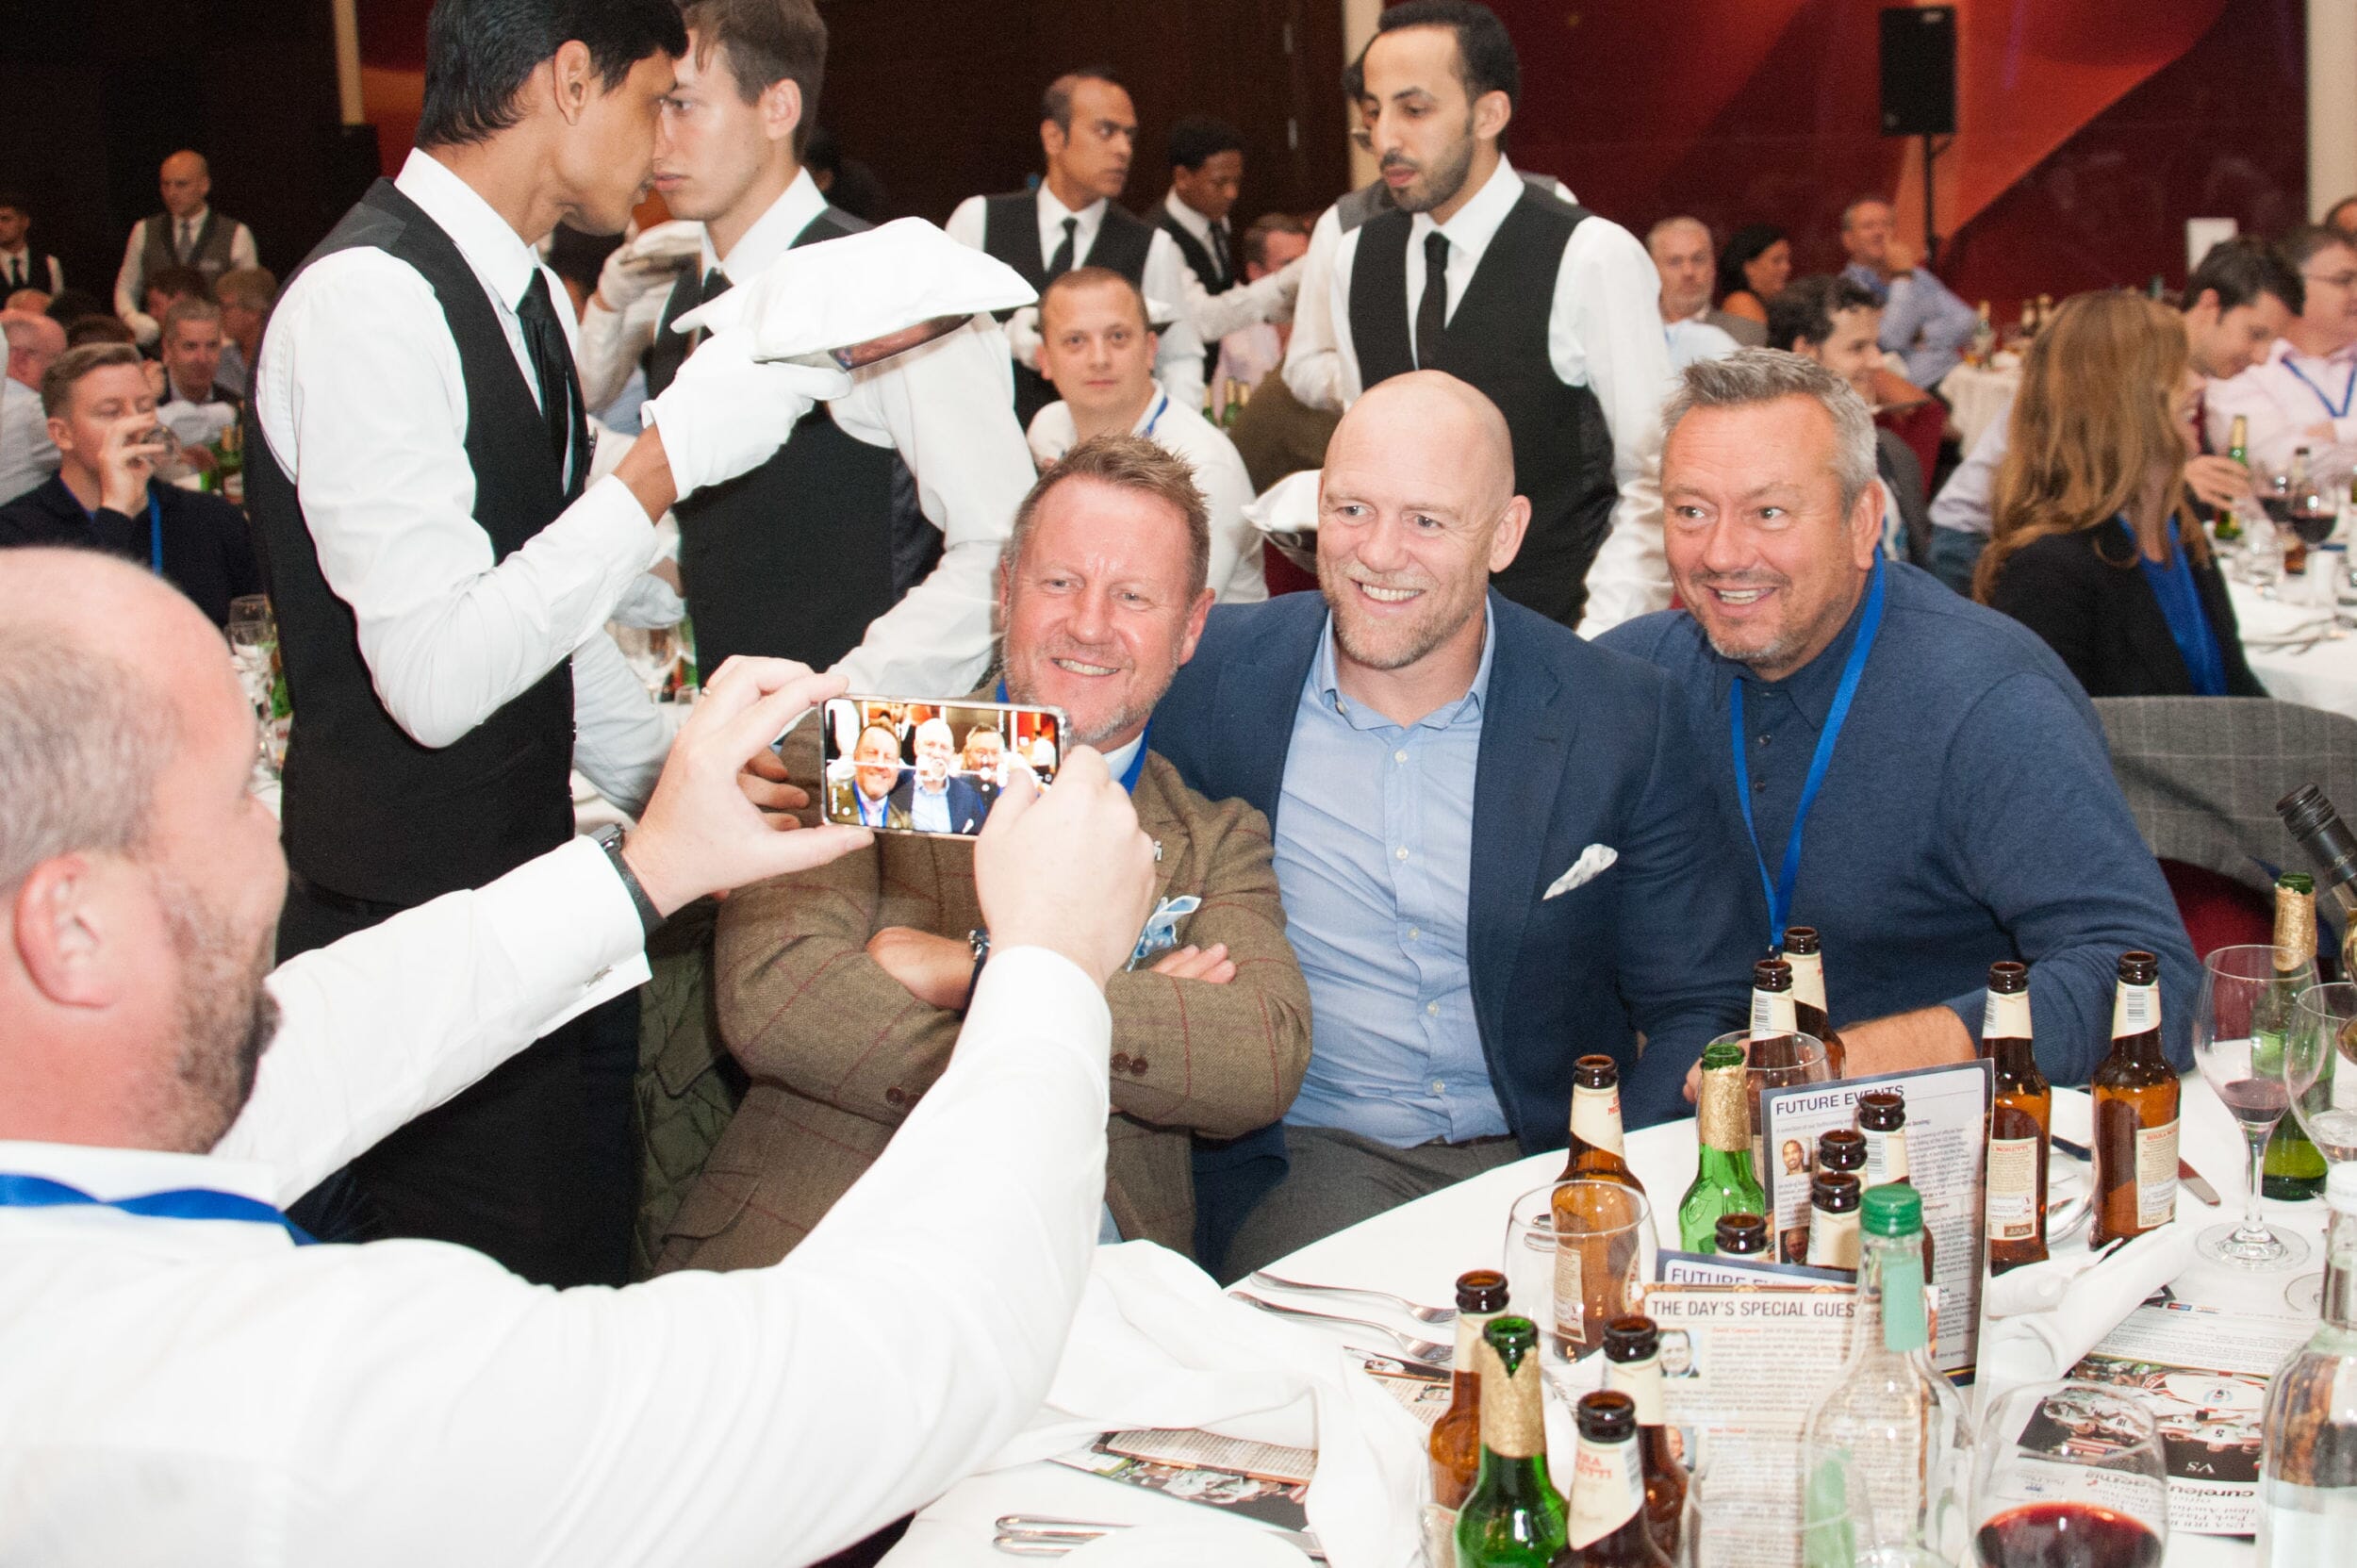 Mike Tindall at our Rugby World Cup event